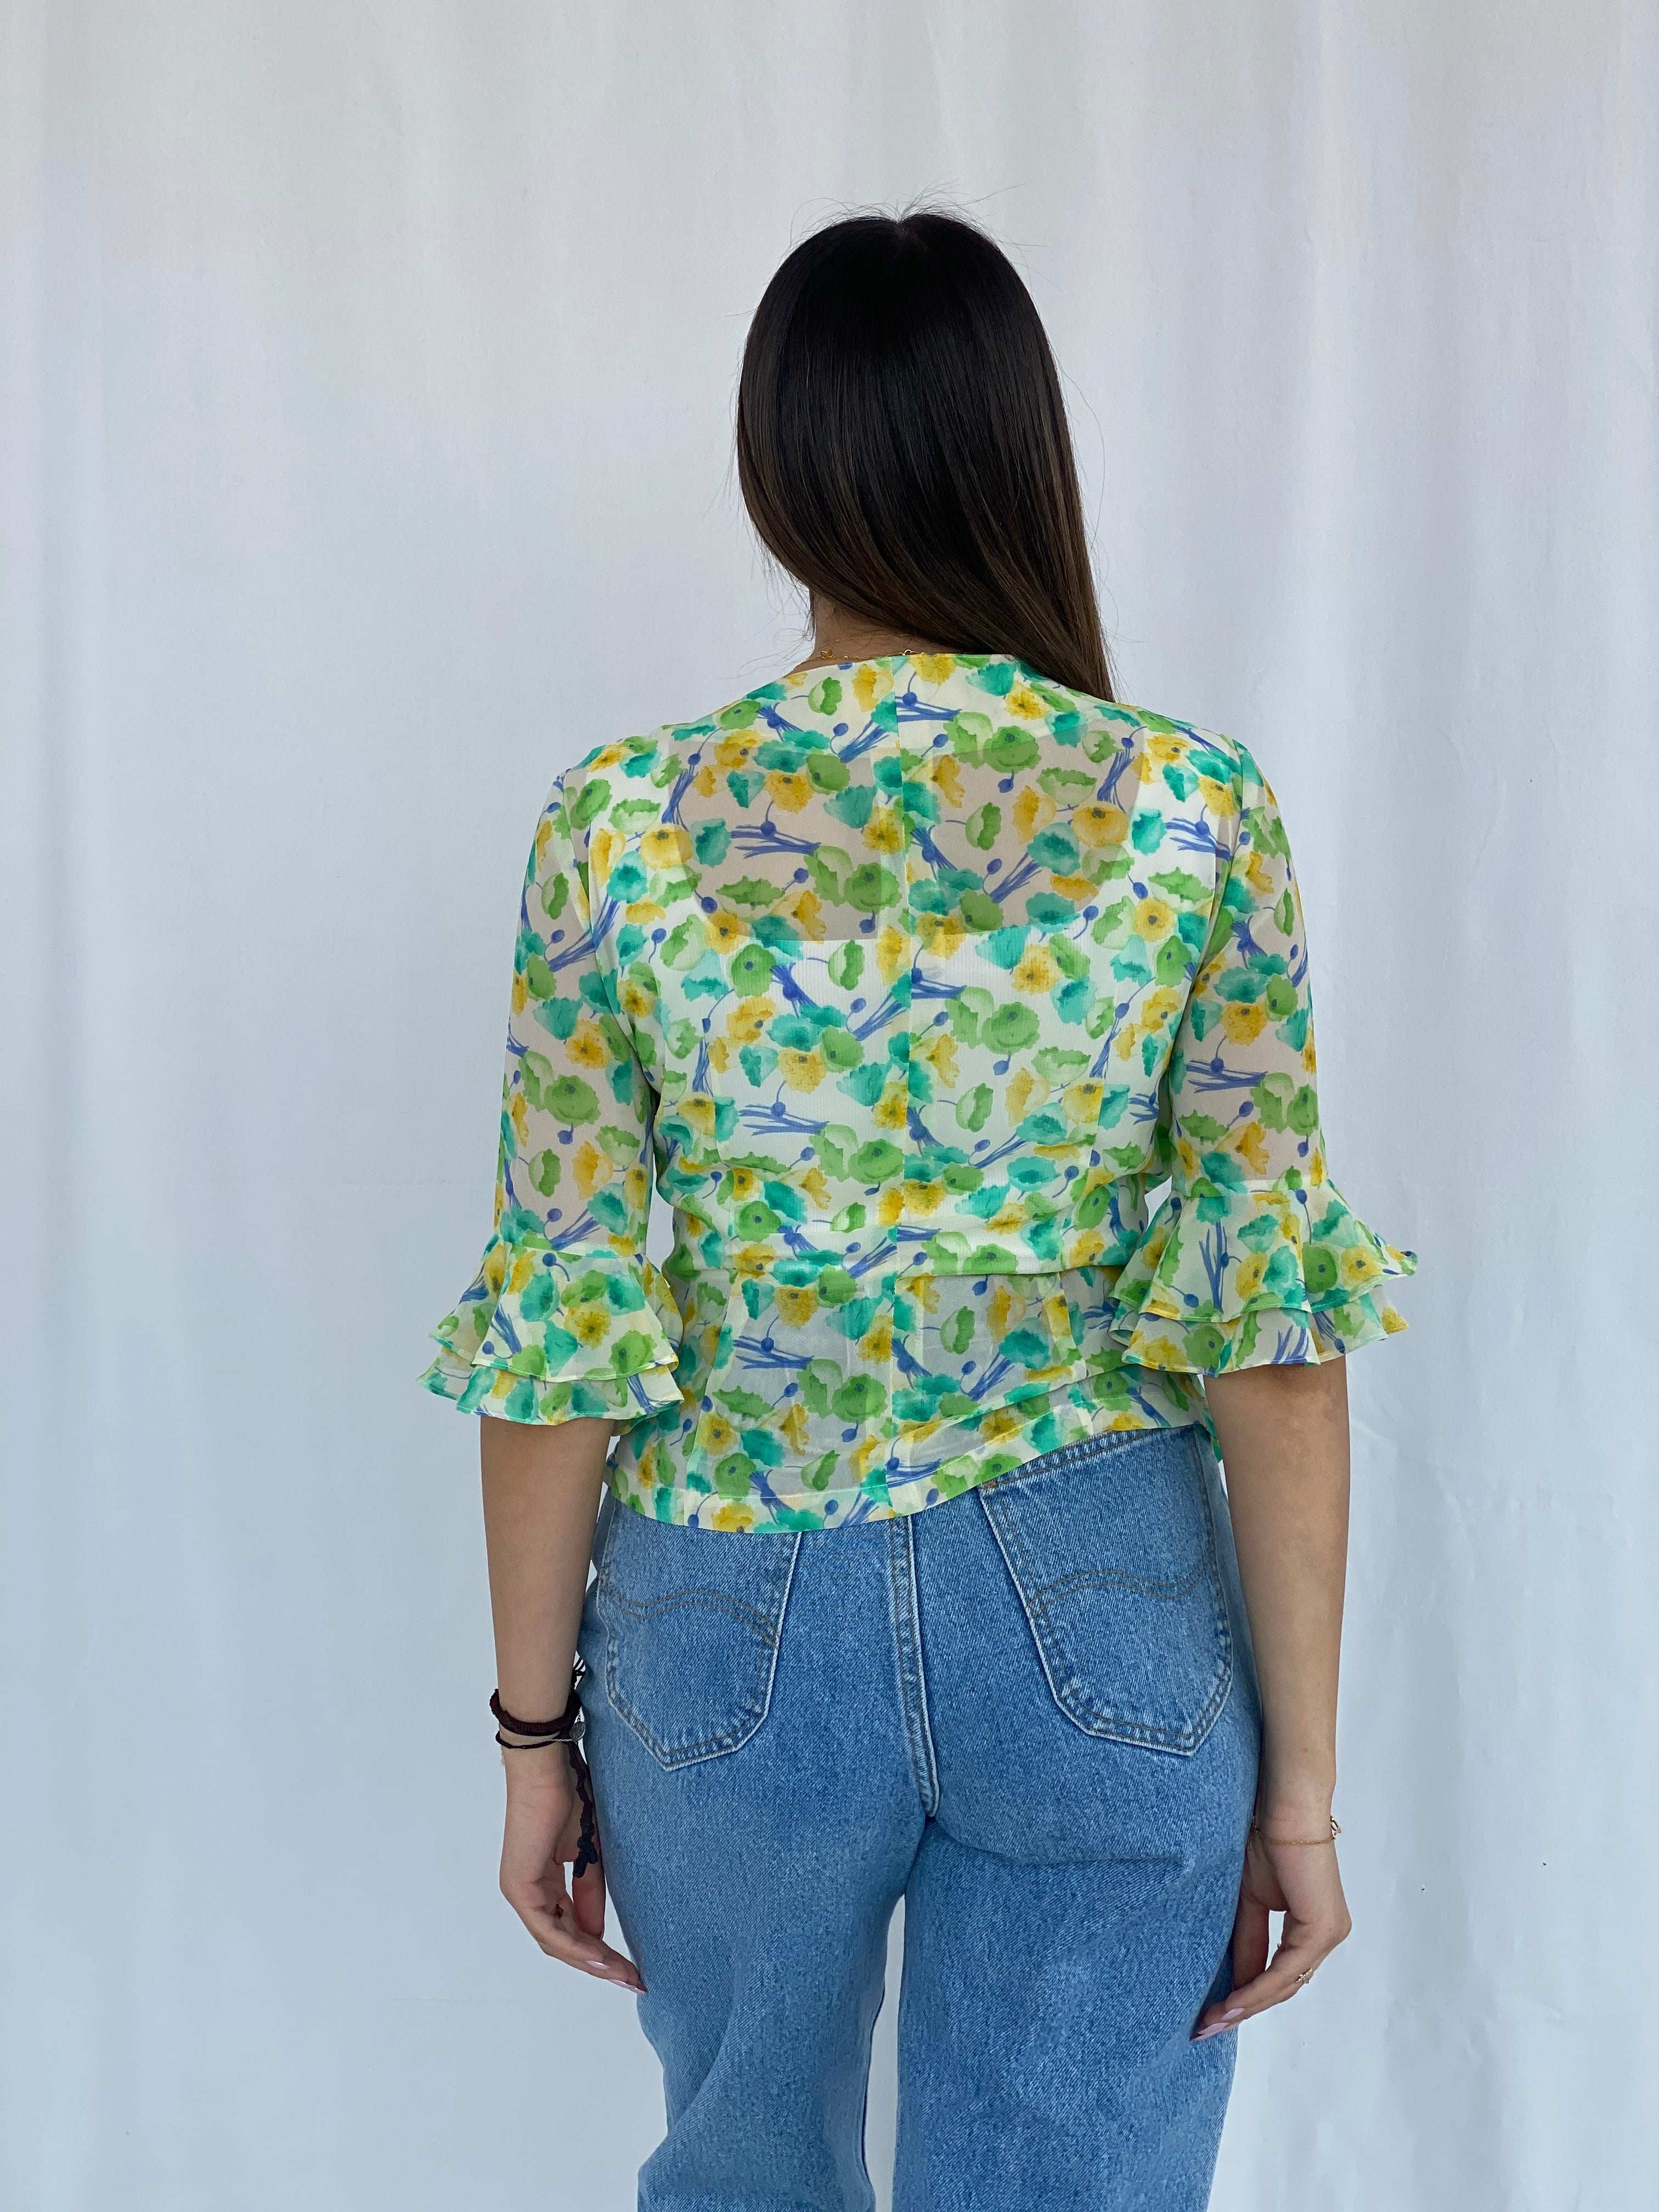 Vintage Floral Green and Yellow Shirt Size S - Balagan Vintage Half Sleeve Shirt floral, floral print, floral shirt, Juana, NEW IN